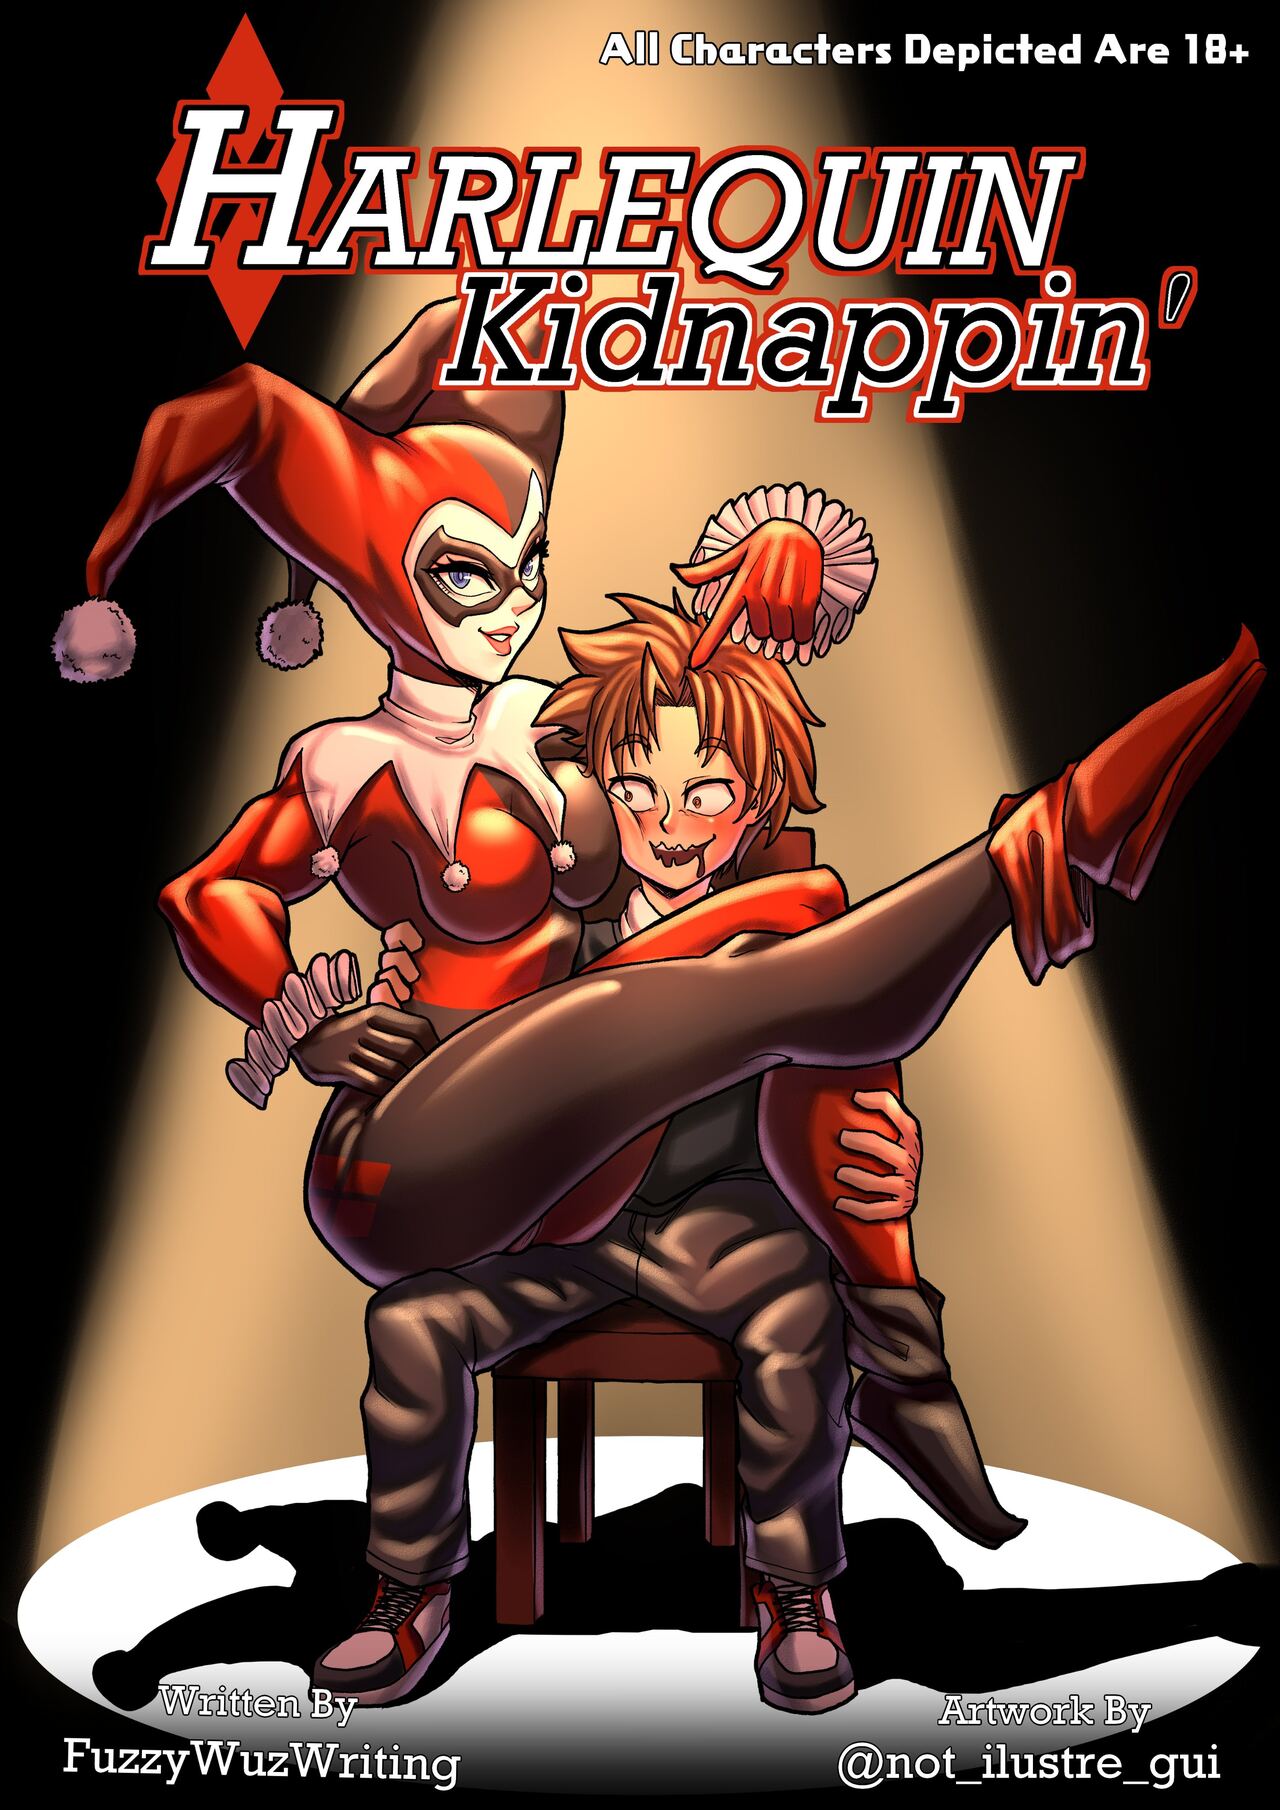 HARLEQUIN Kidnappin parte 1